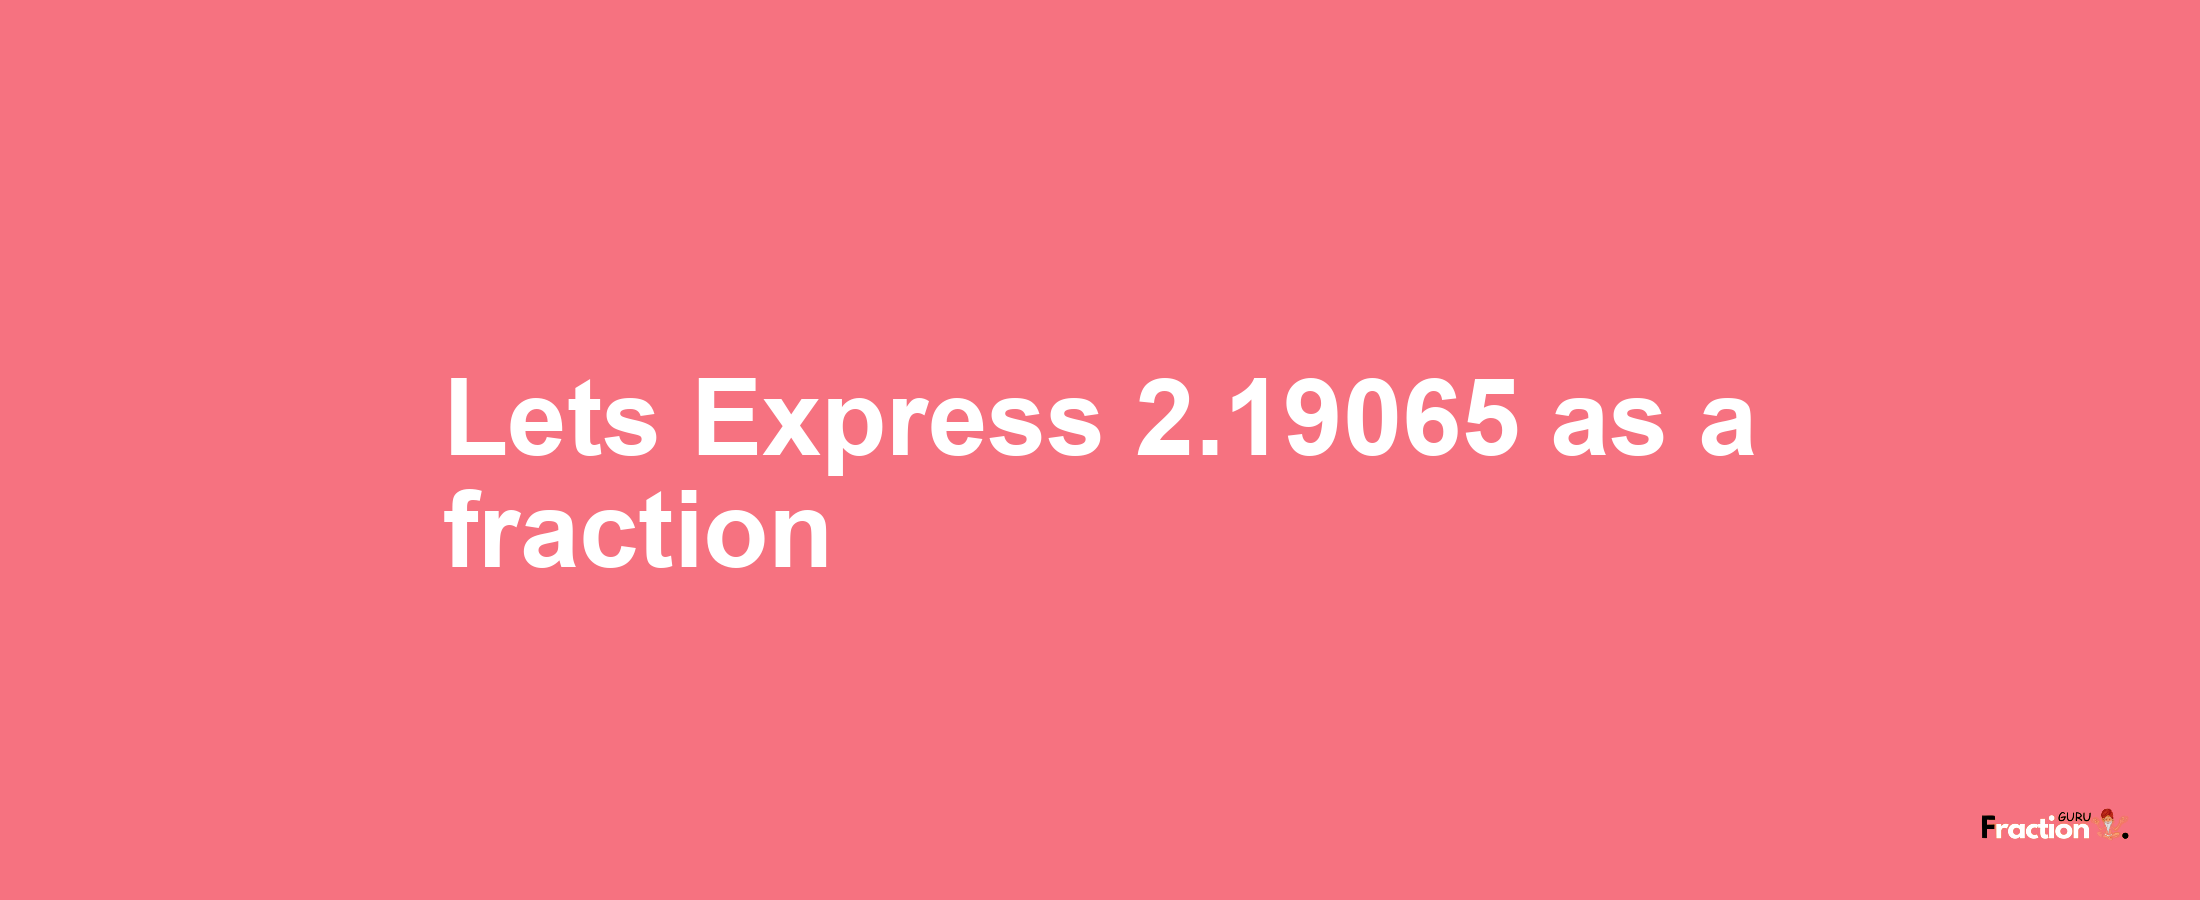 Lets Express 2.19065 as afraction